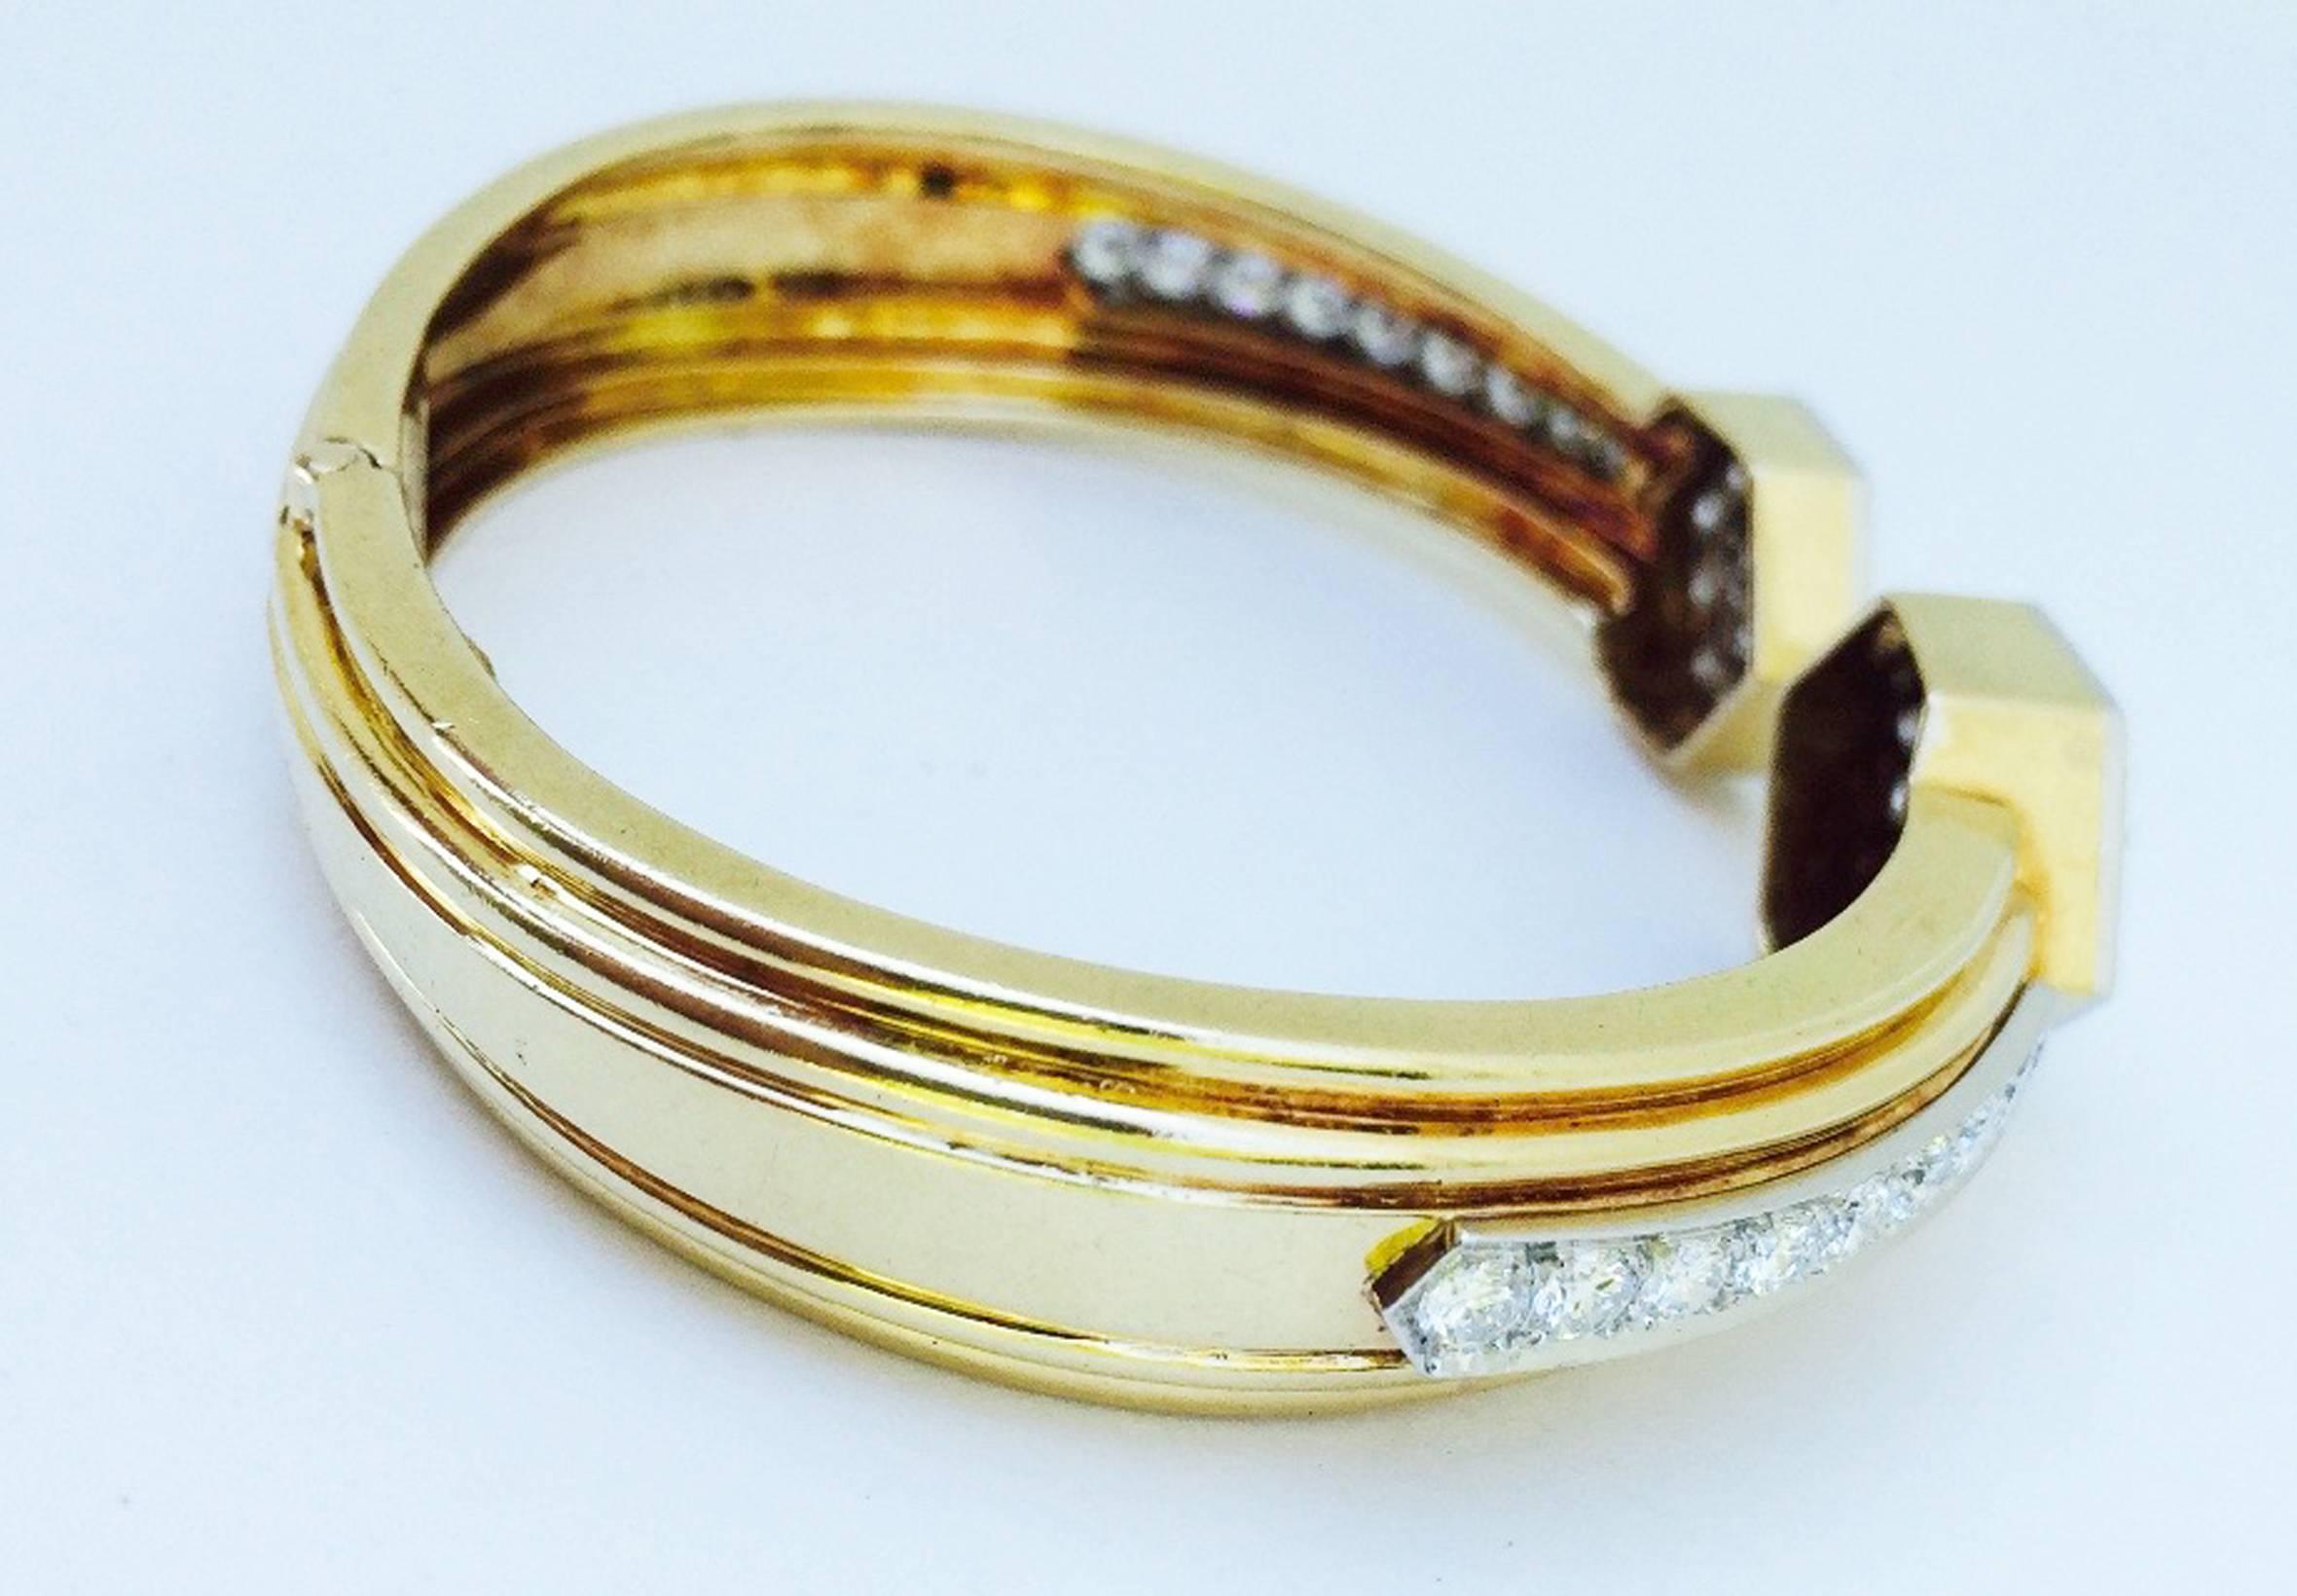 A exquisite David Webb diamond clamper cuff bracelet. Signed 18K yellow gold and platinum hinged item features two opposing diamond set (approx. 7.5 ctw) 